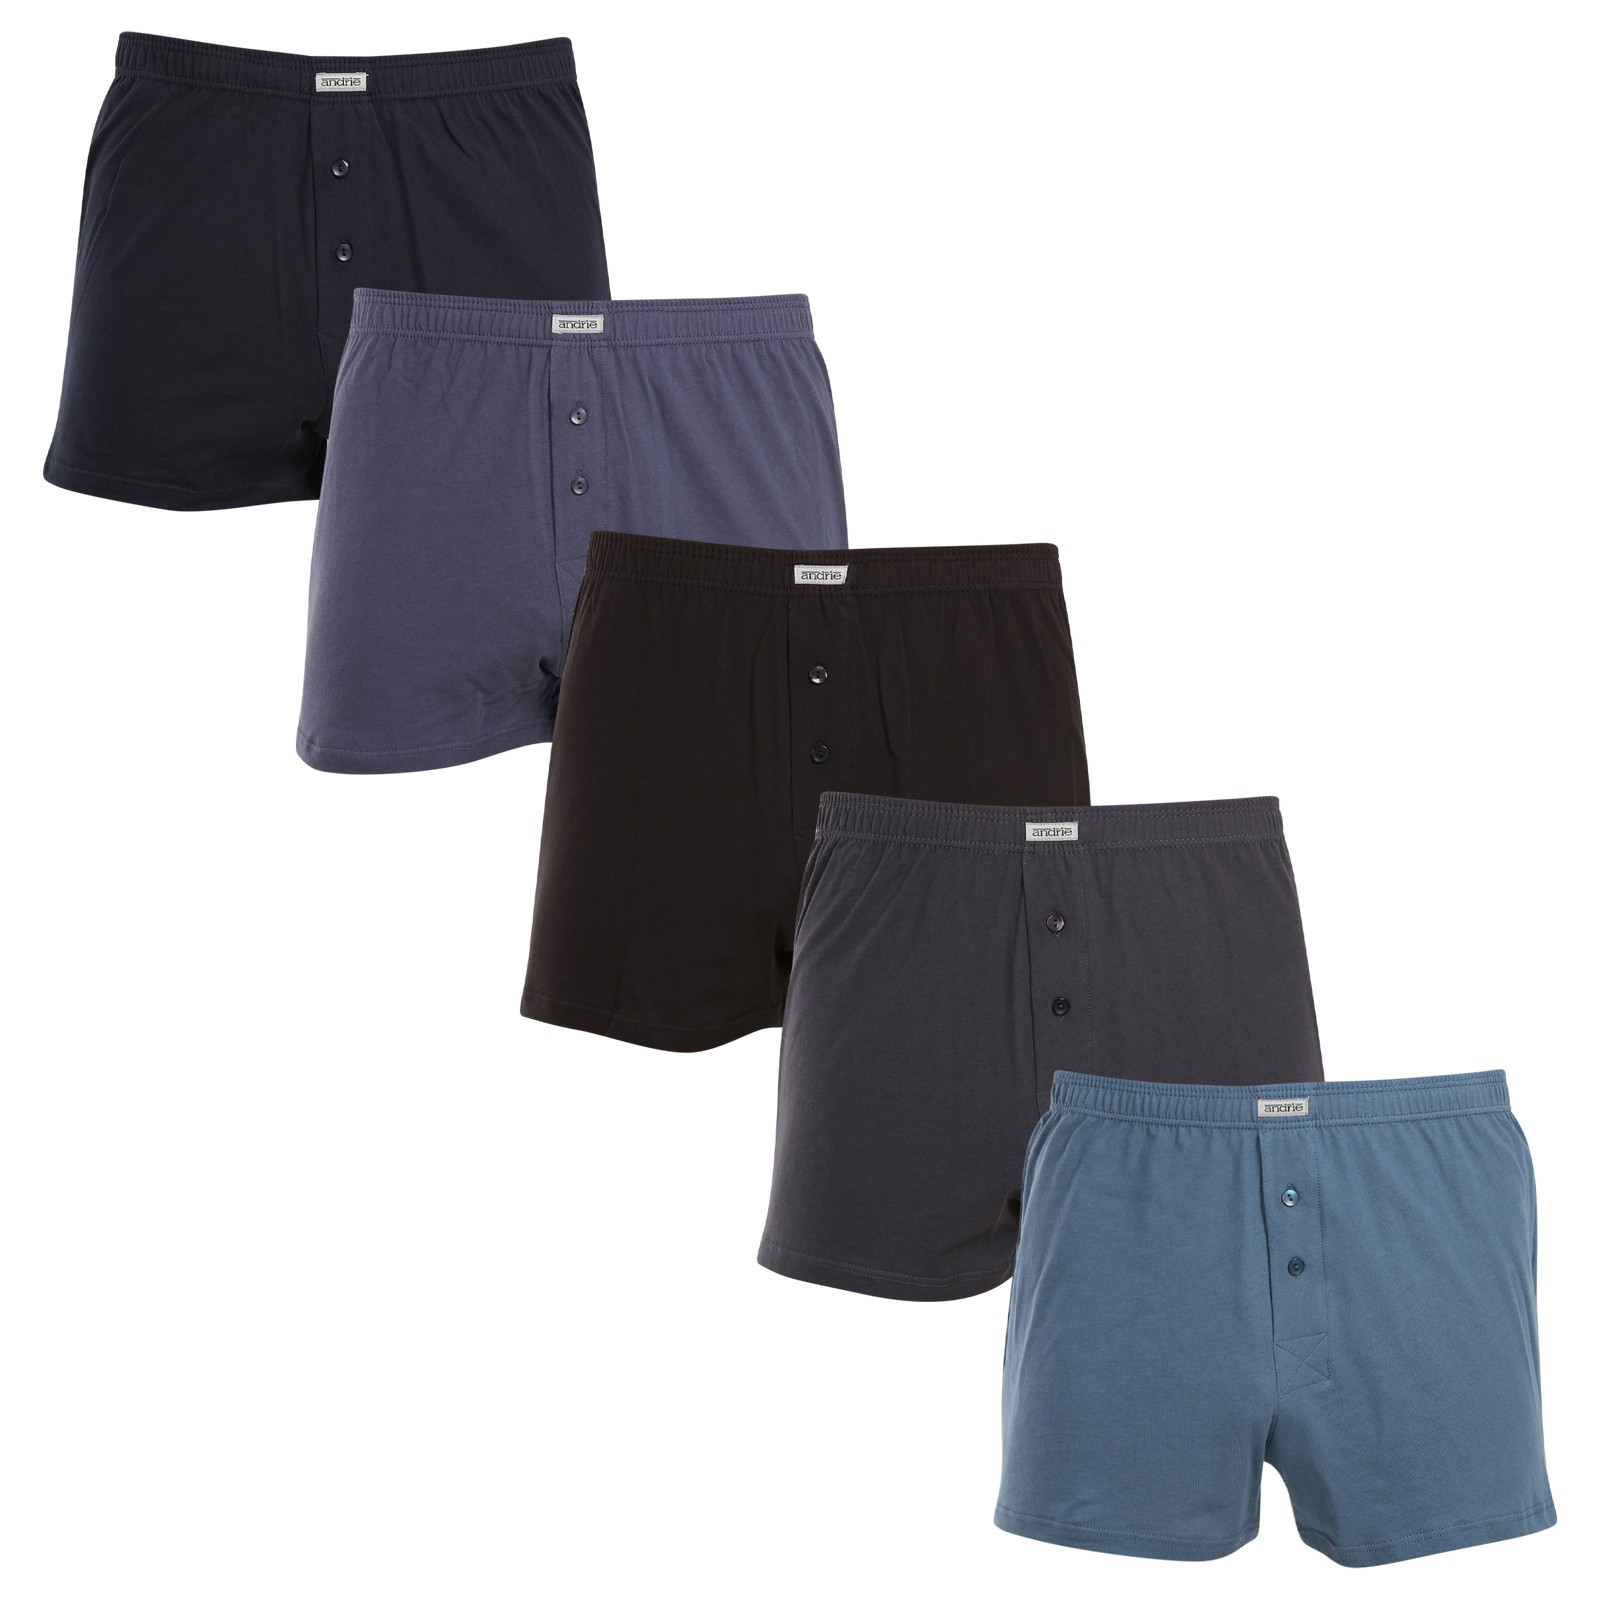 5PACK men's boxer shorts Andrie multicolor